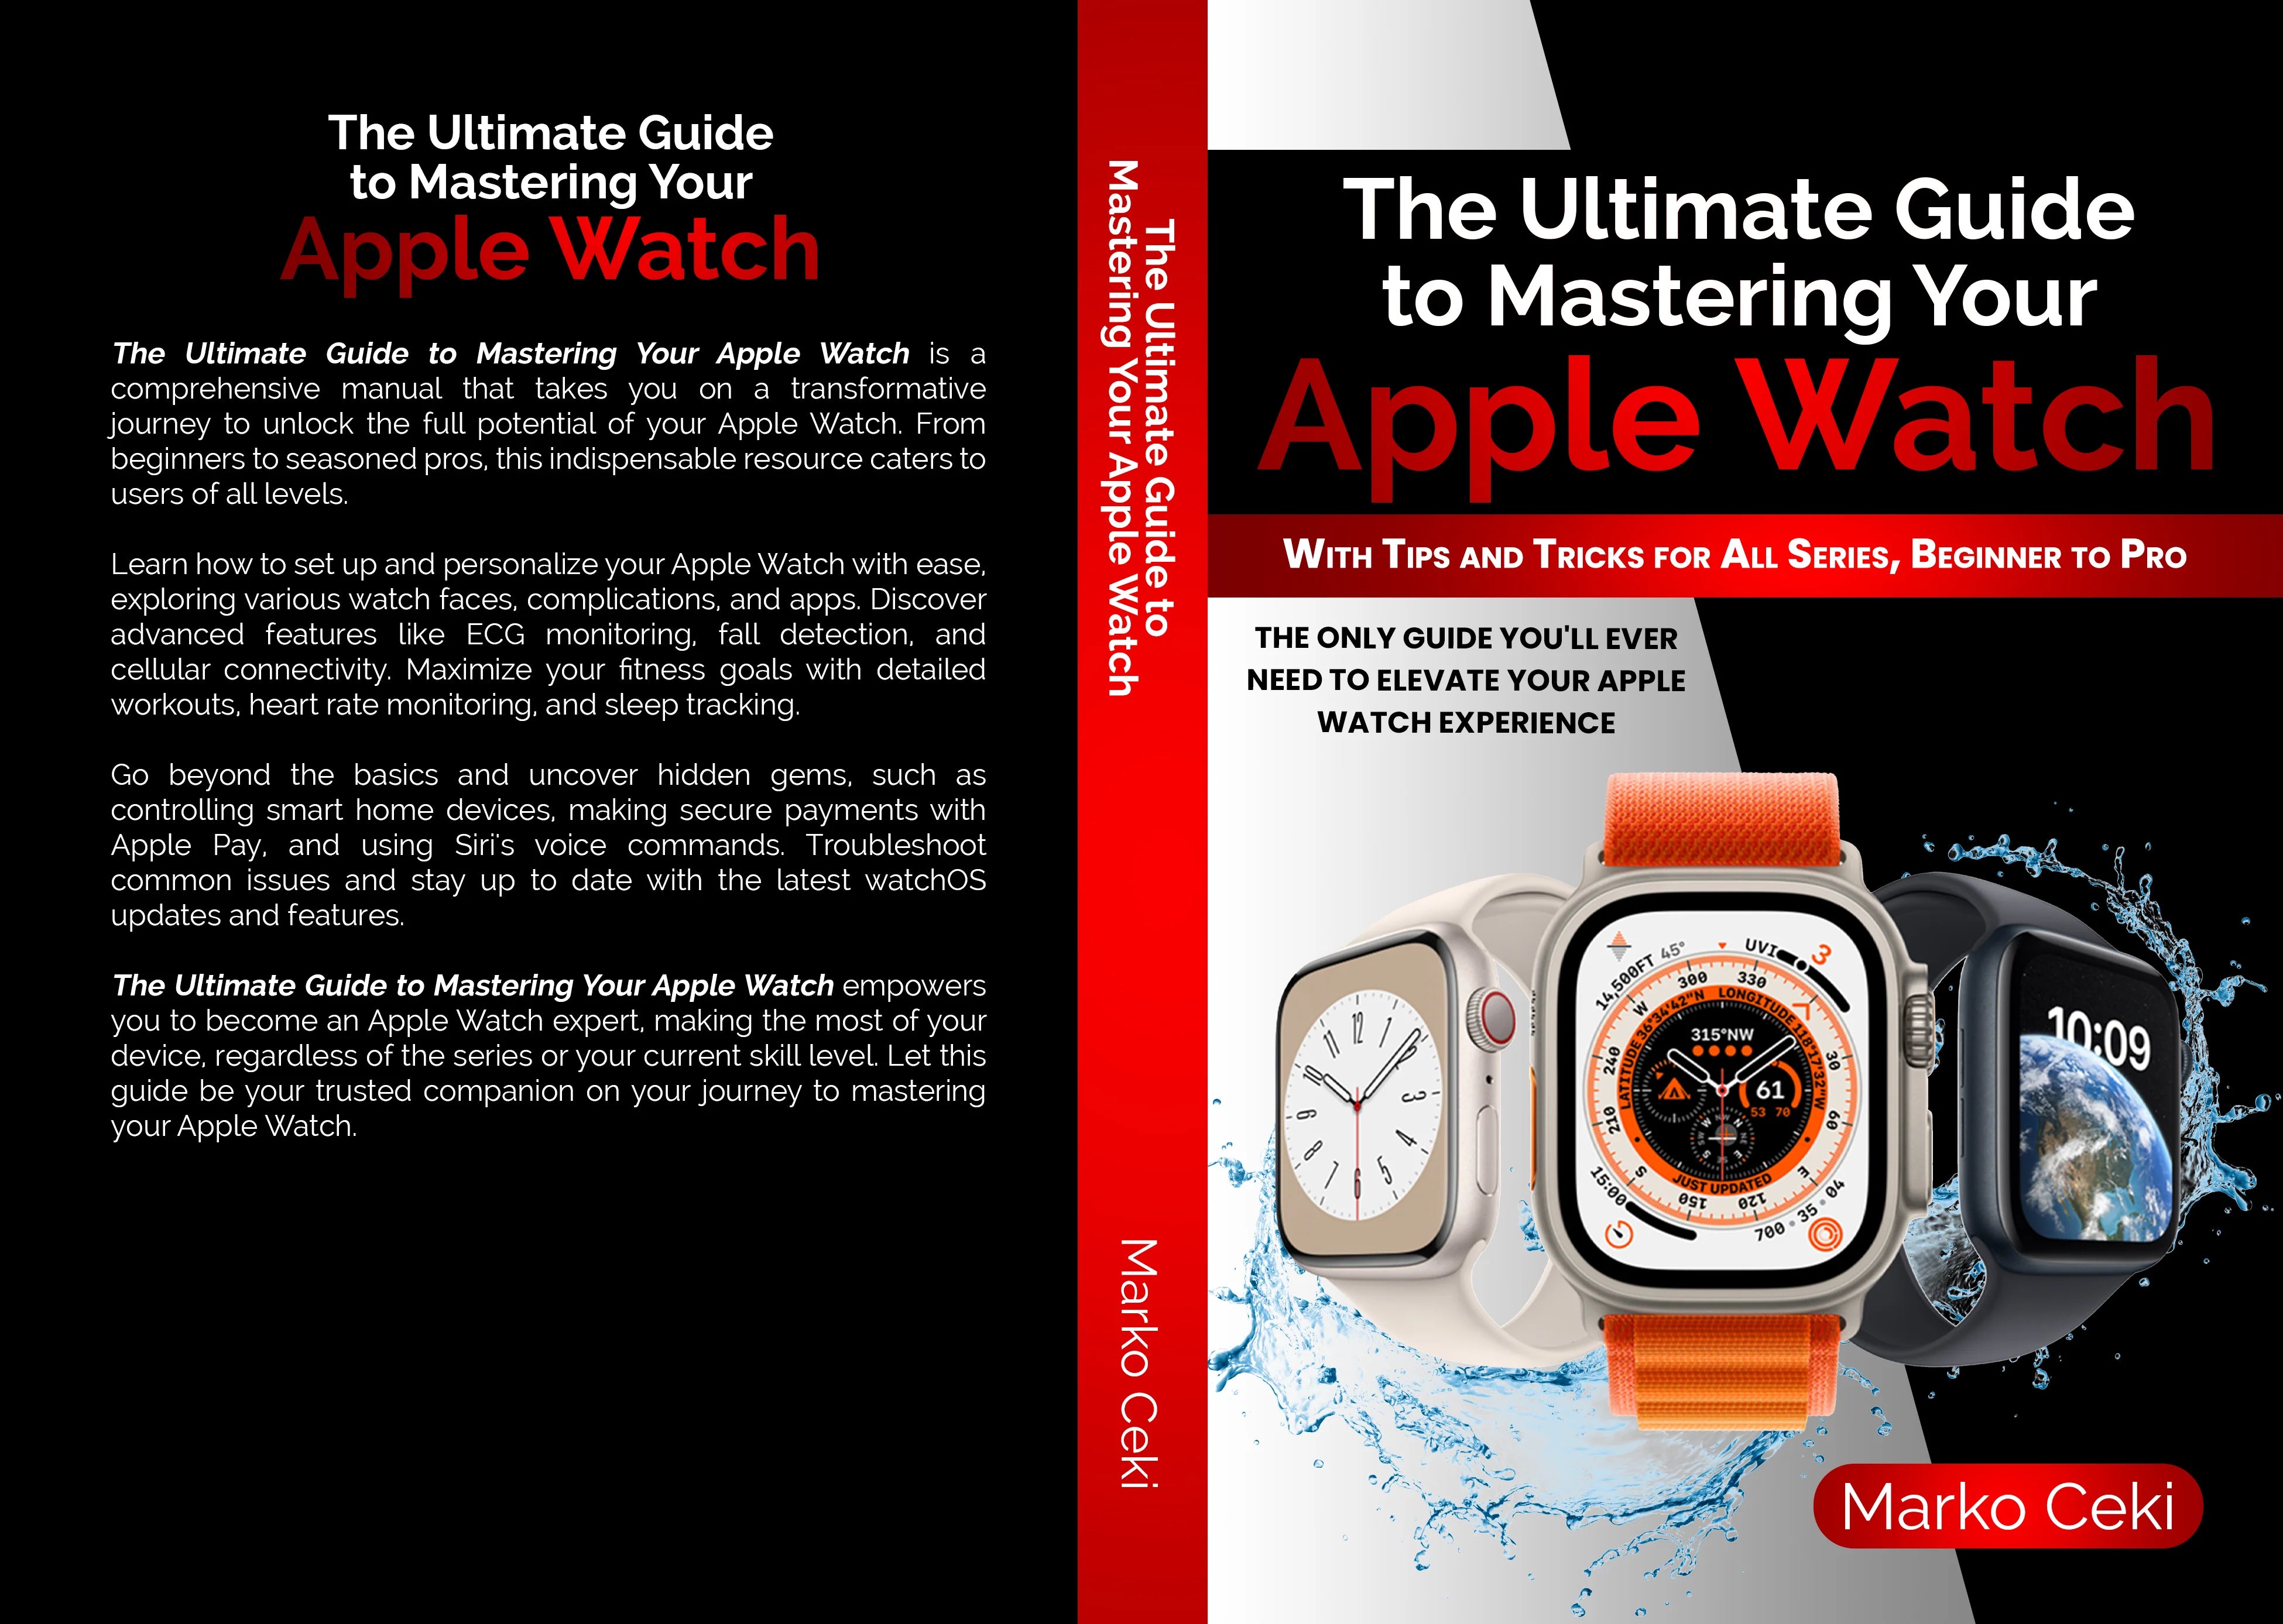 The Ultimate Guide to Mastering Your Apple Watch: With Tips and Tricks for All Series, Beginner to Pro